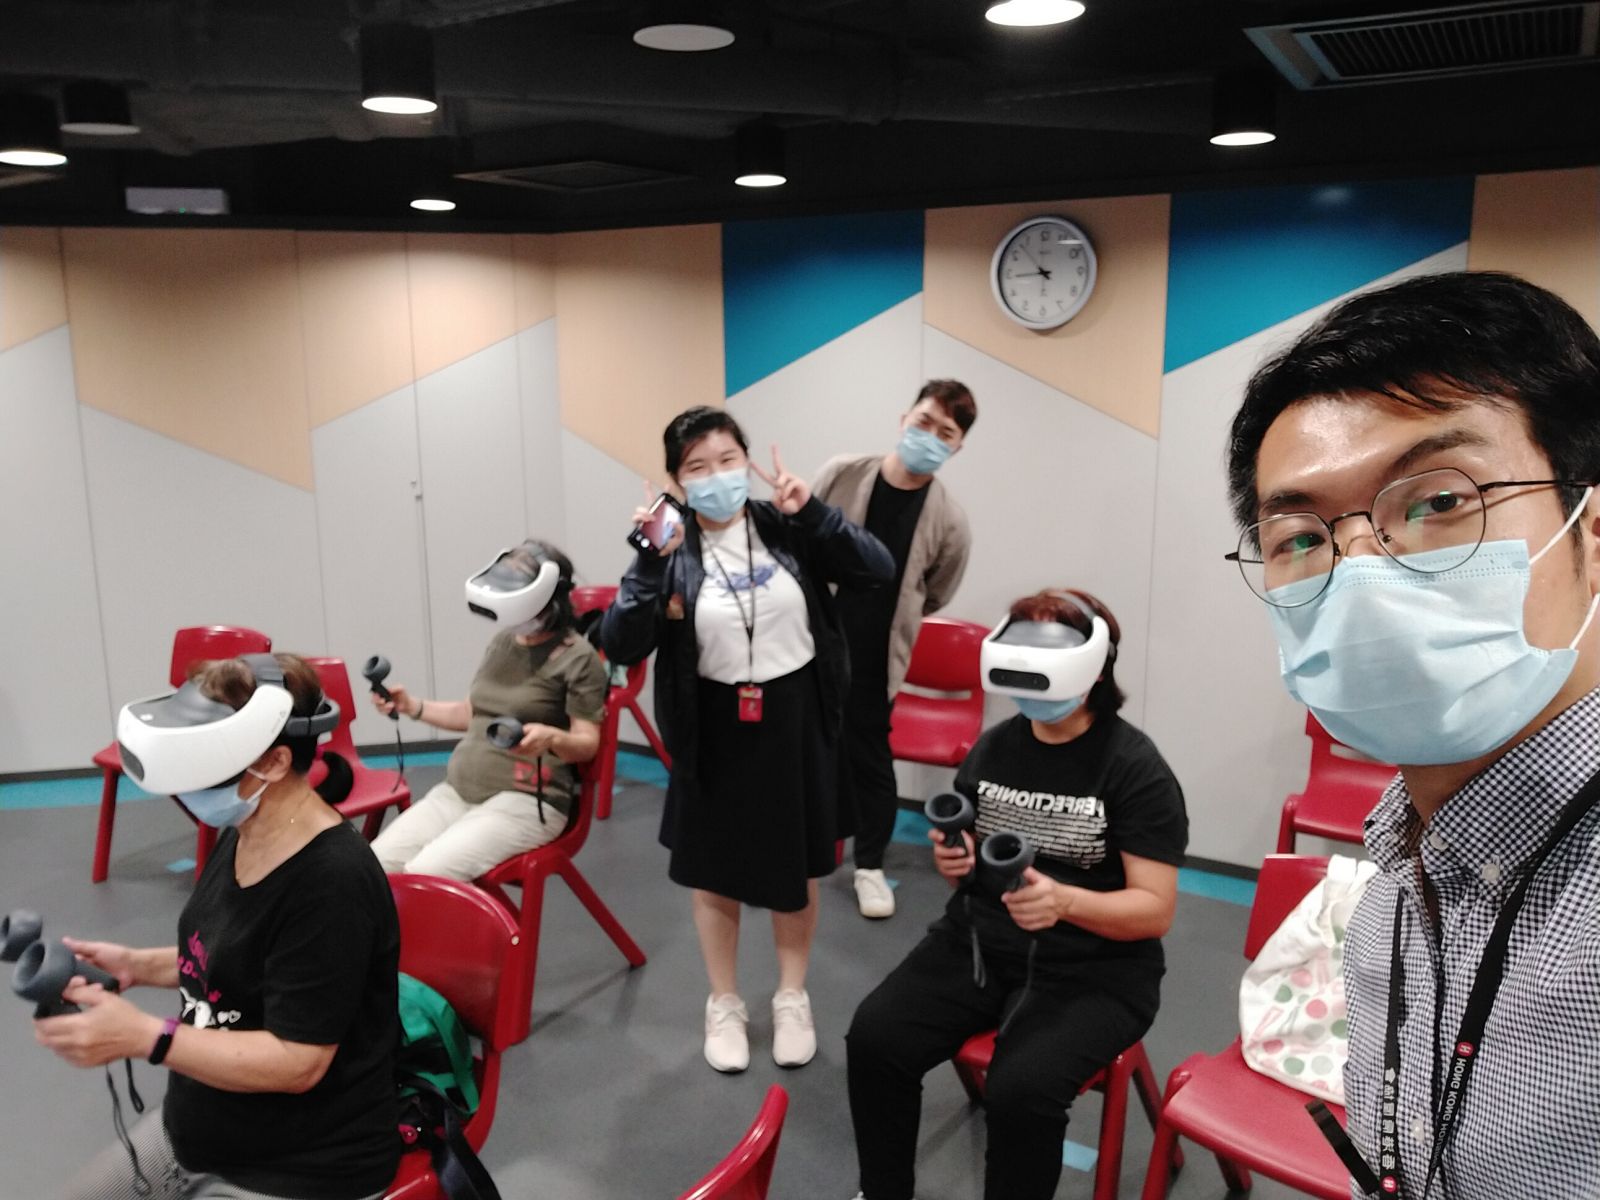 AFH Ambassadors experienced VR game at ERC.